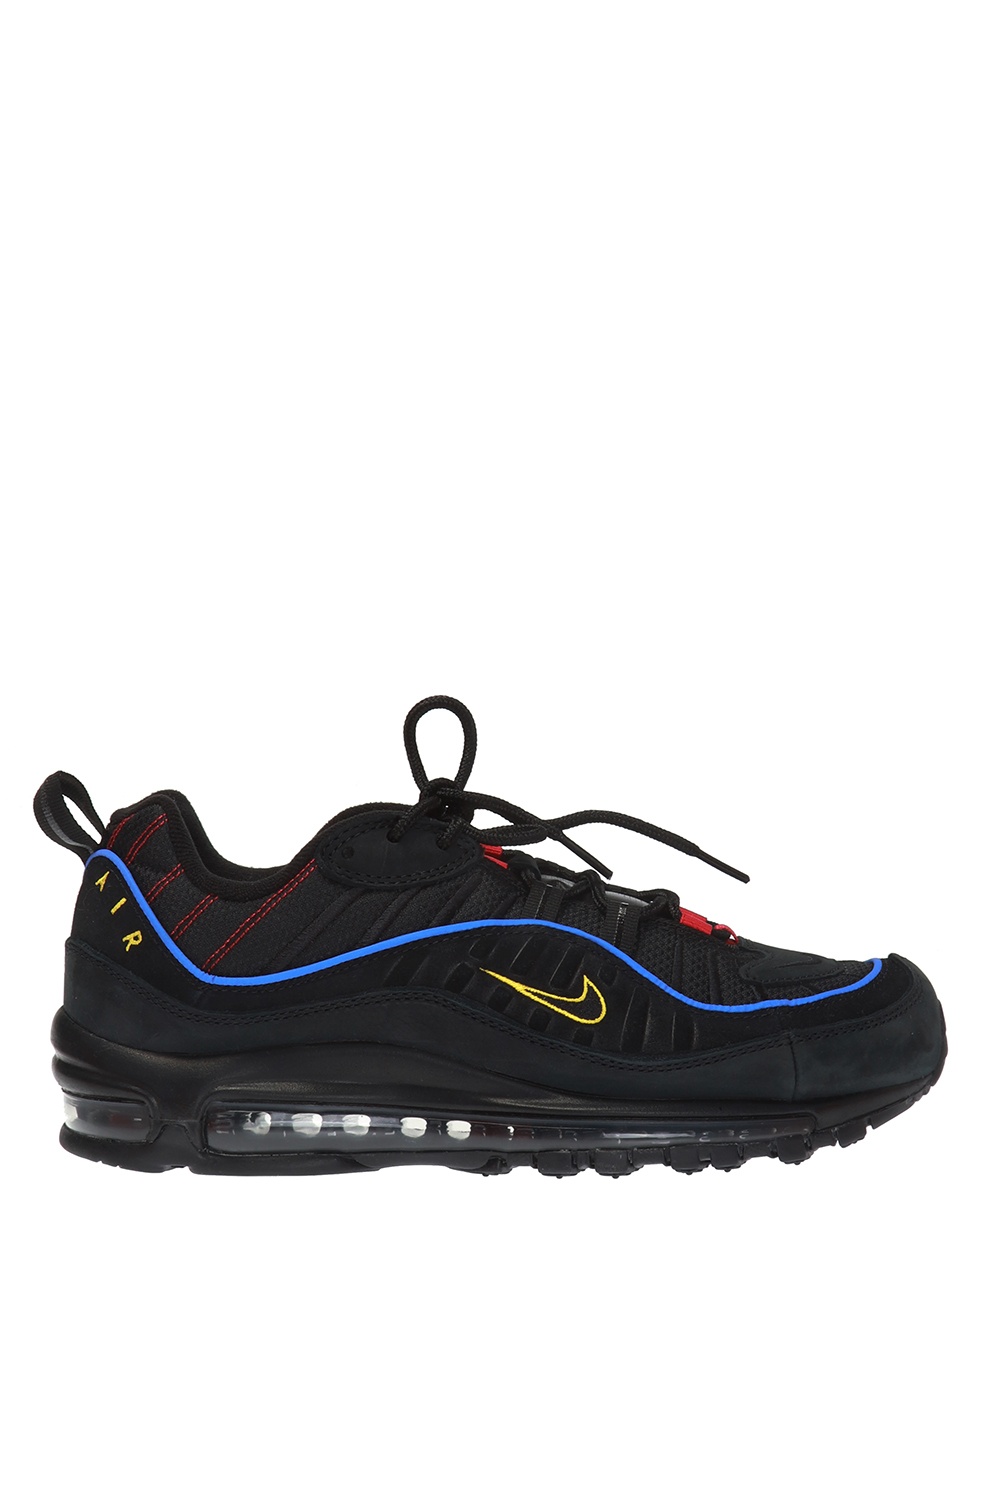 nike air max 98 size guide